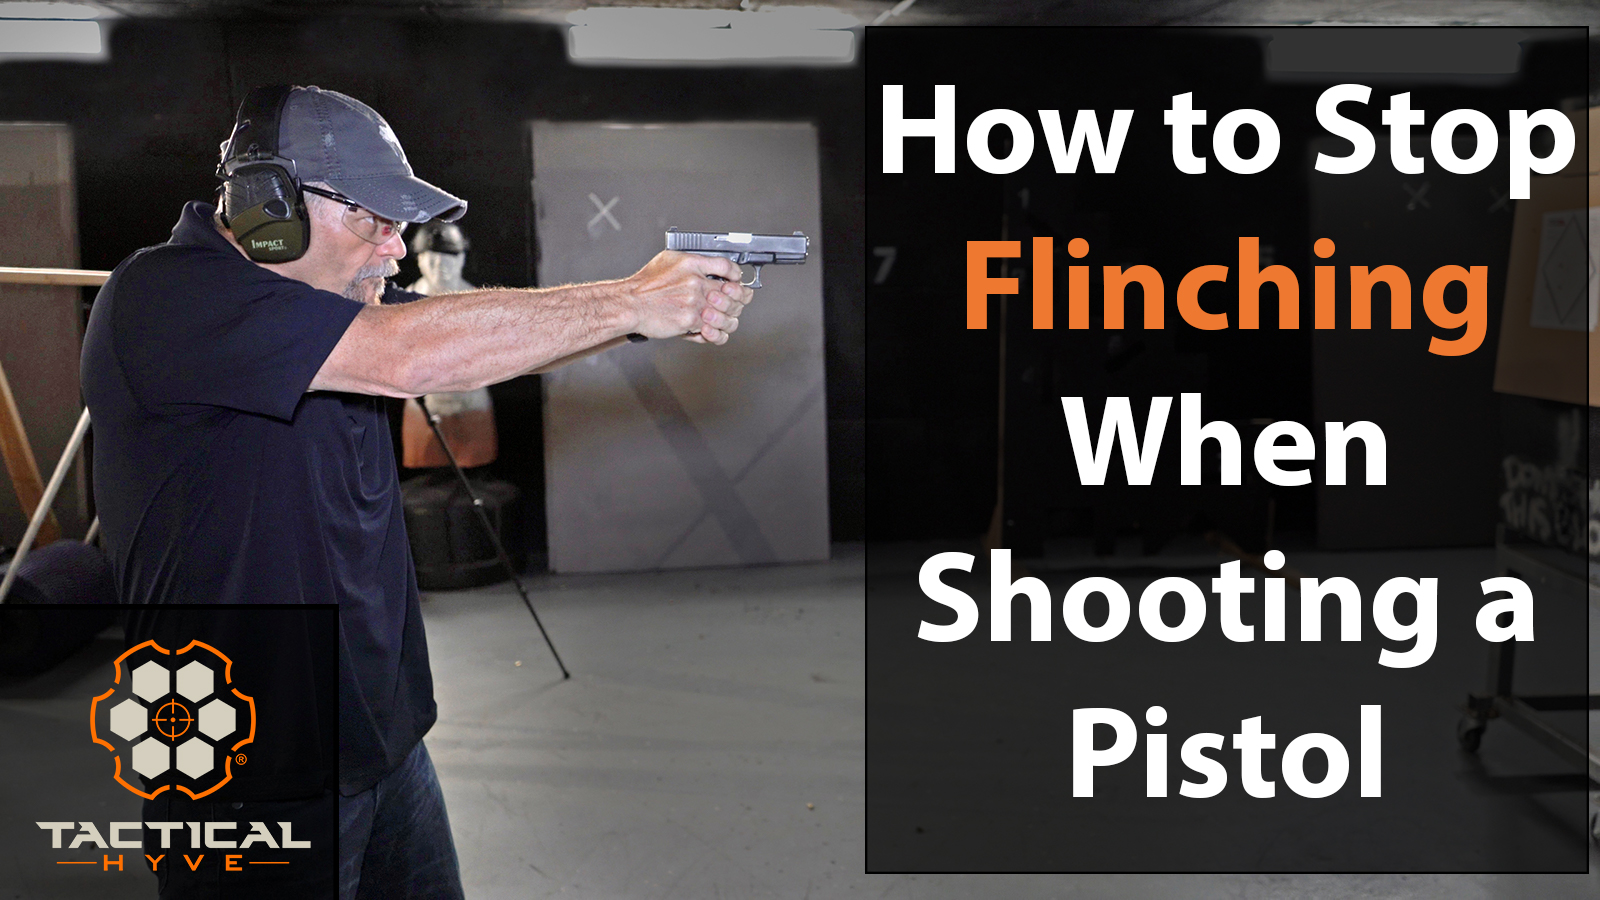 How to stop flinching when shooting a pistol